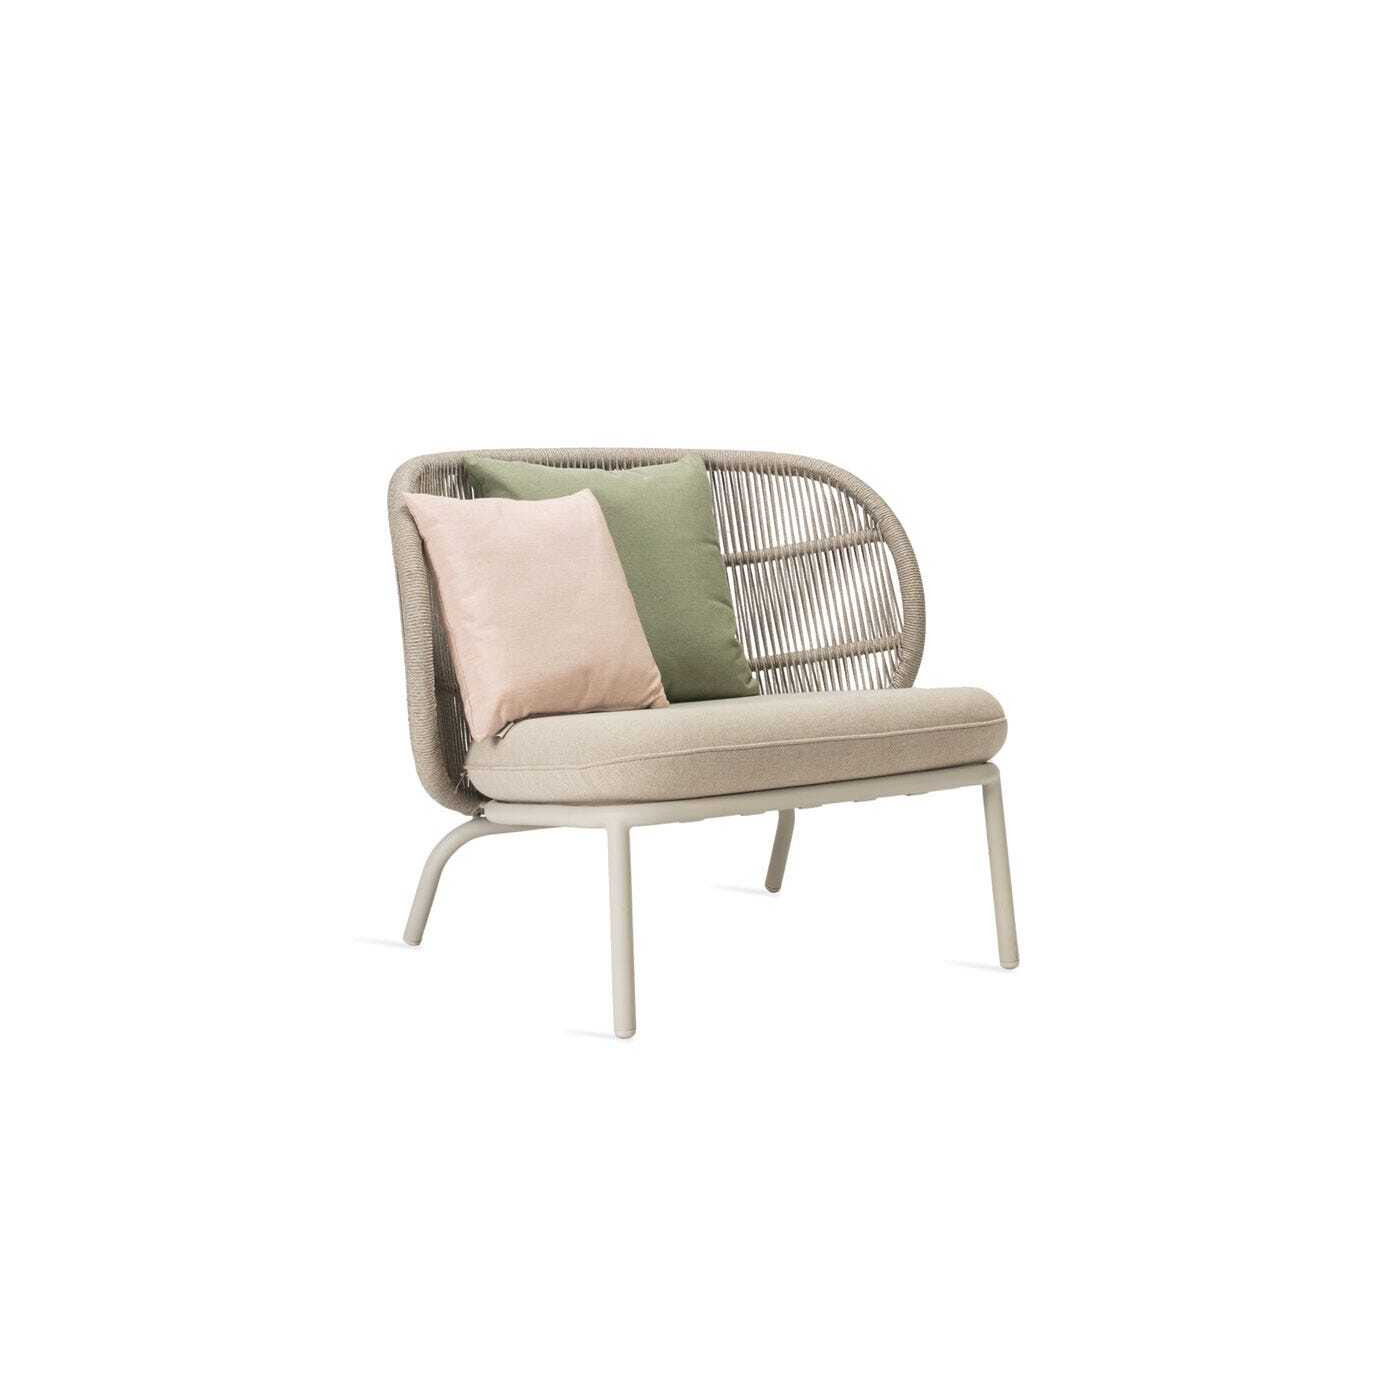 Vincent Sheppard Kodo Outdoor Lounge Chair Dune White Olive and Blush Cushions - image 1